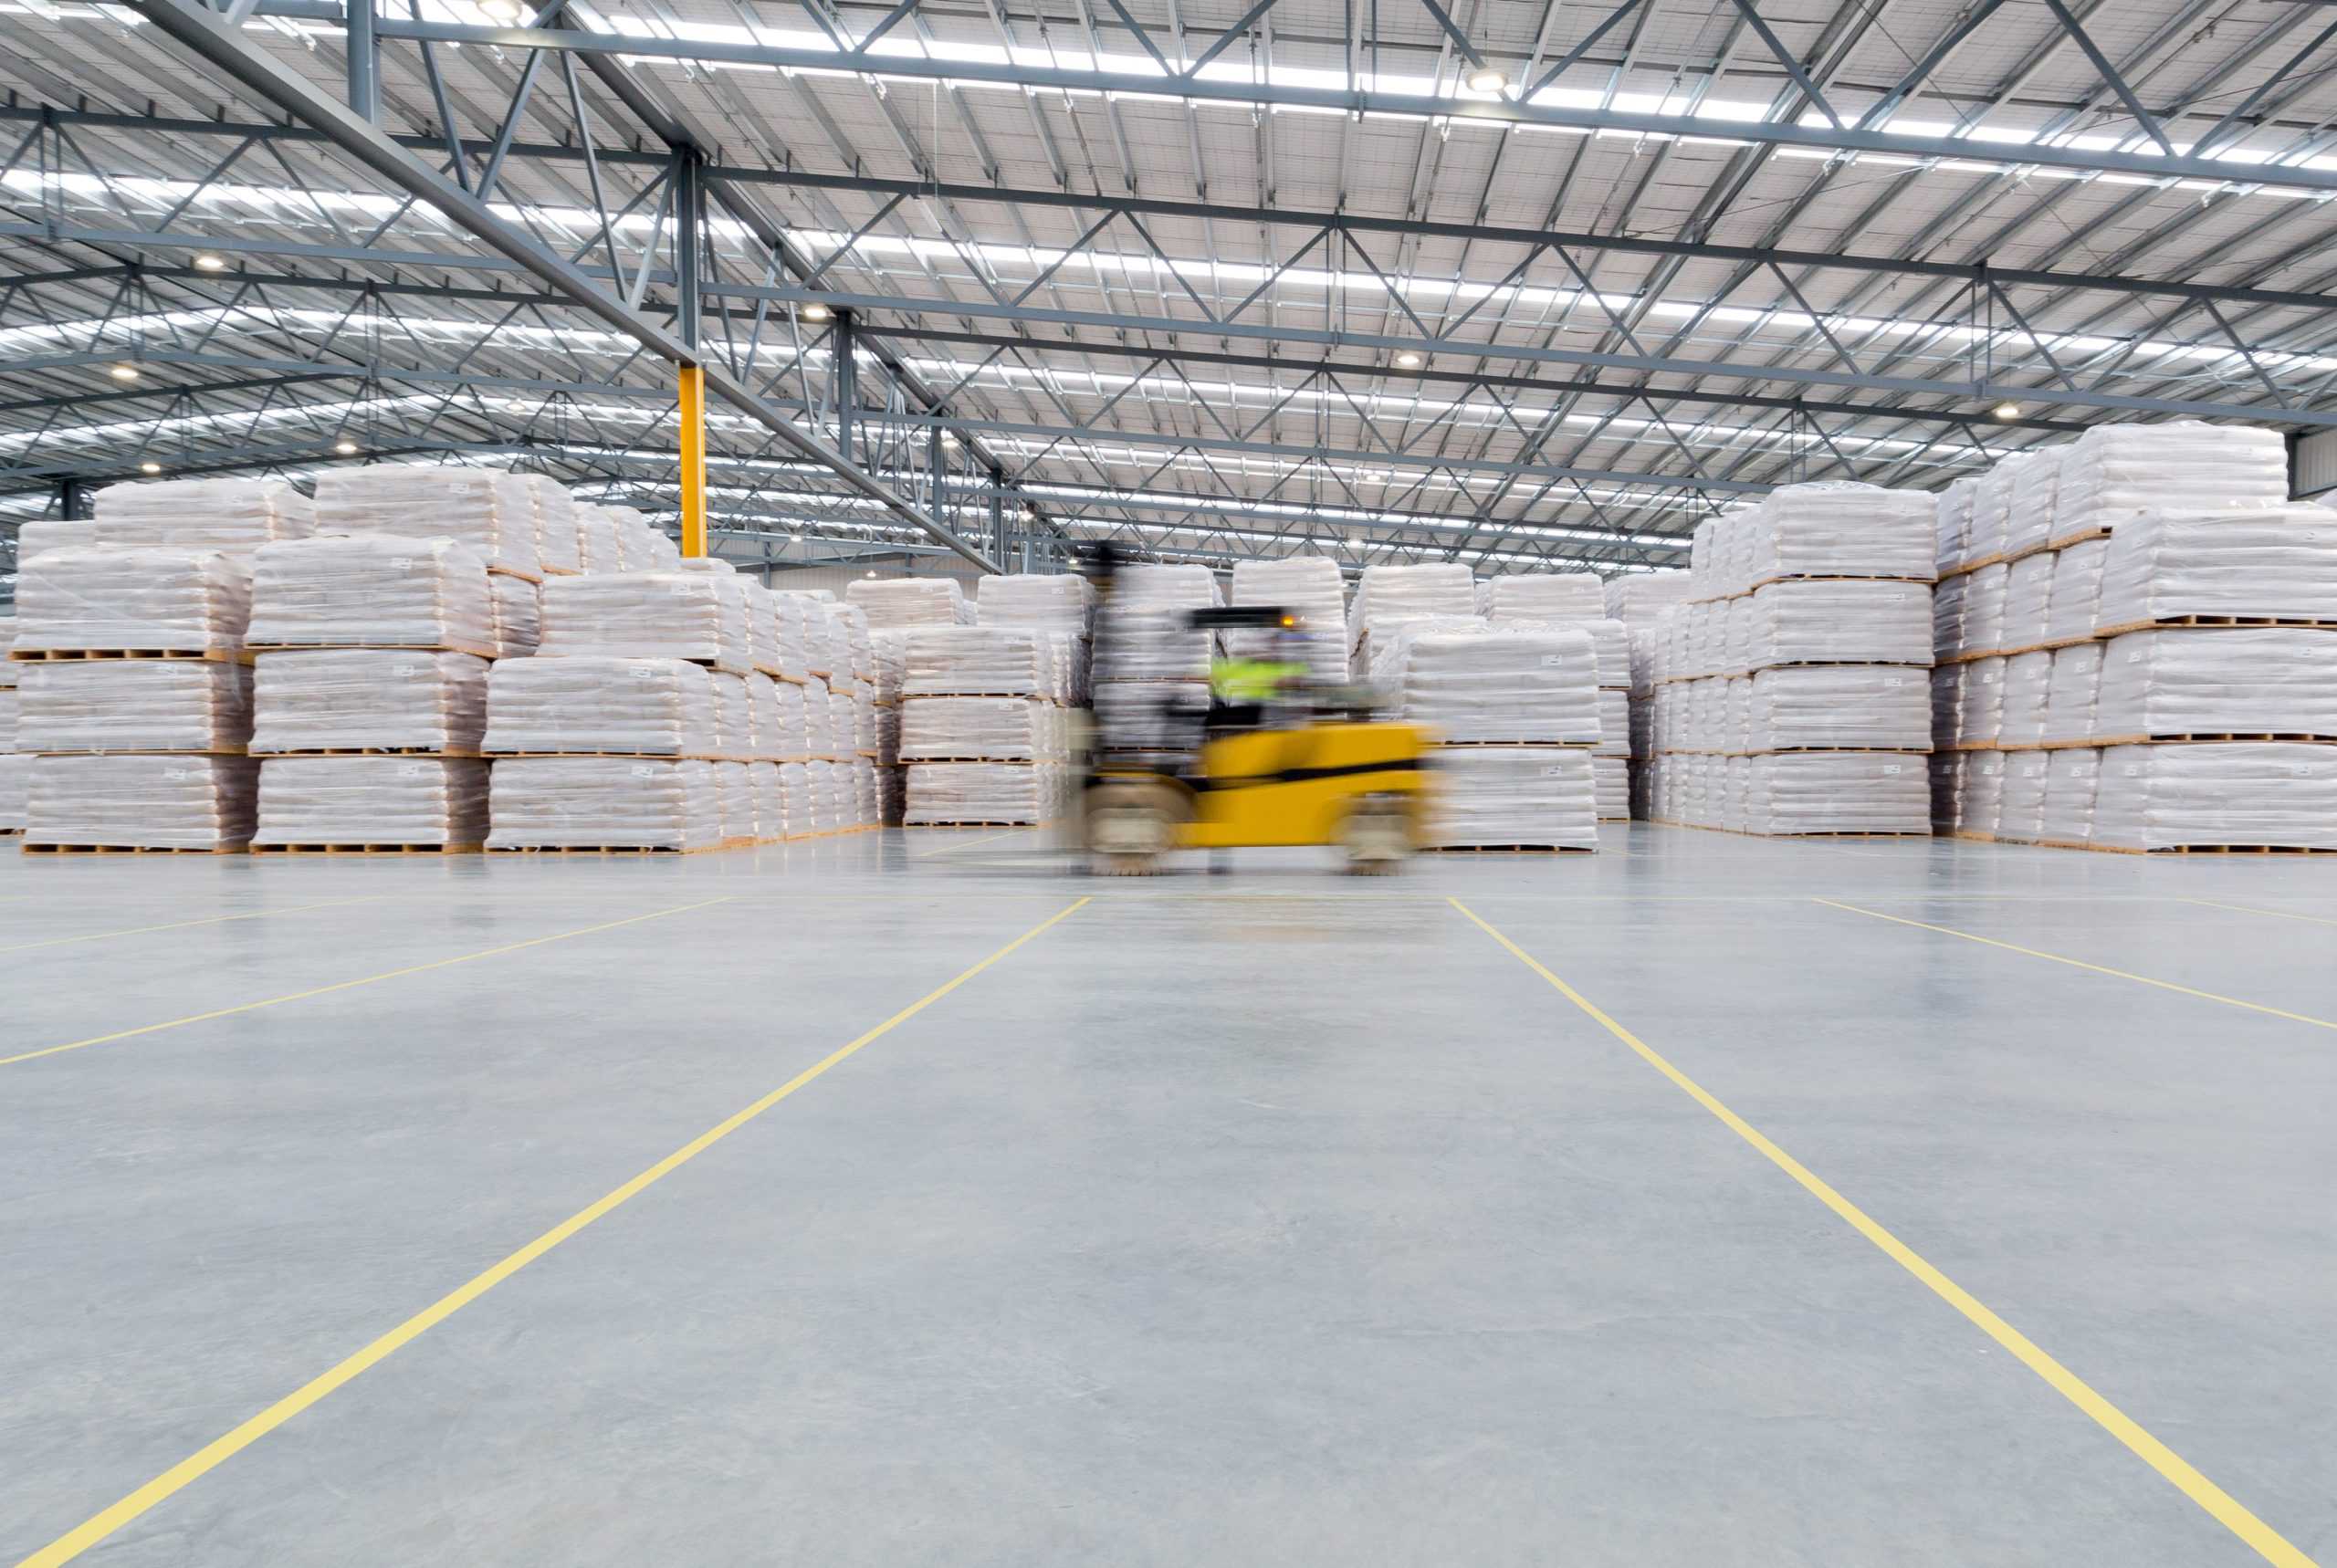 Forklift blurs as it moves past stacked milk products in factory warehouse.